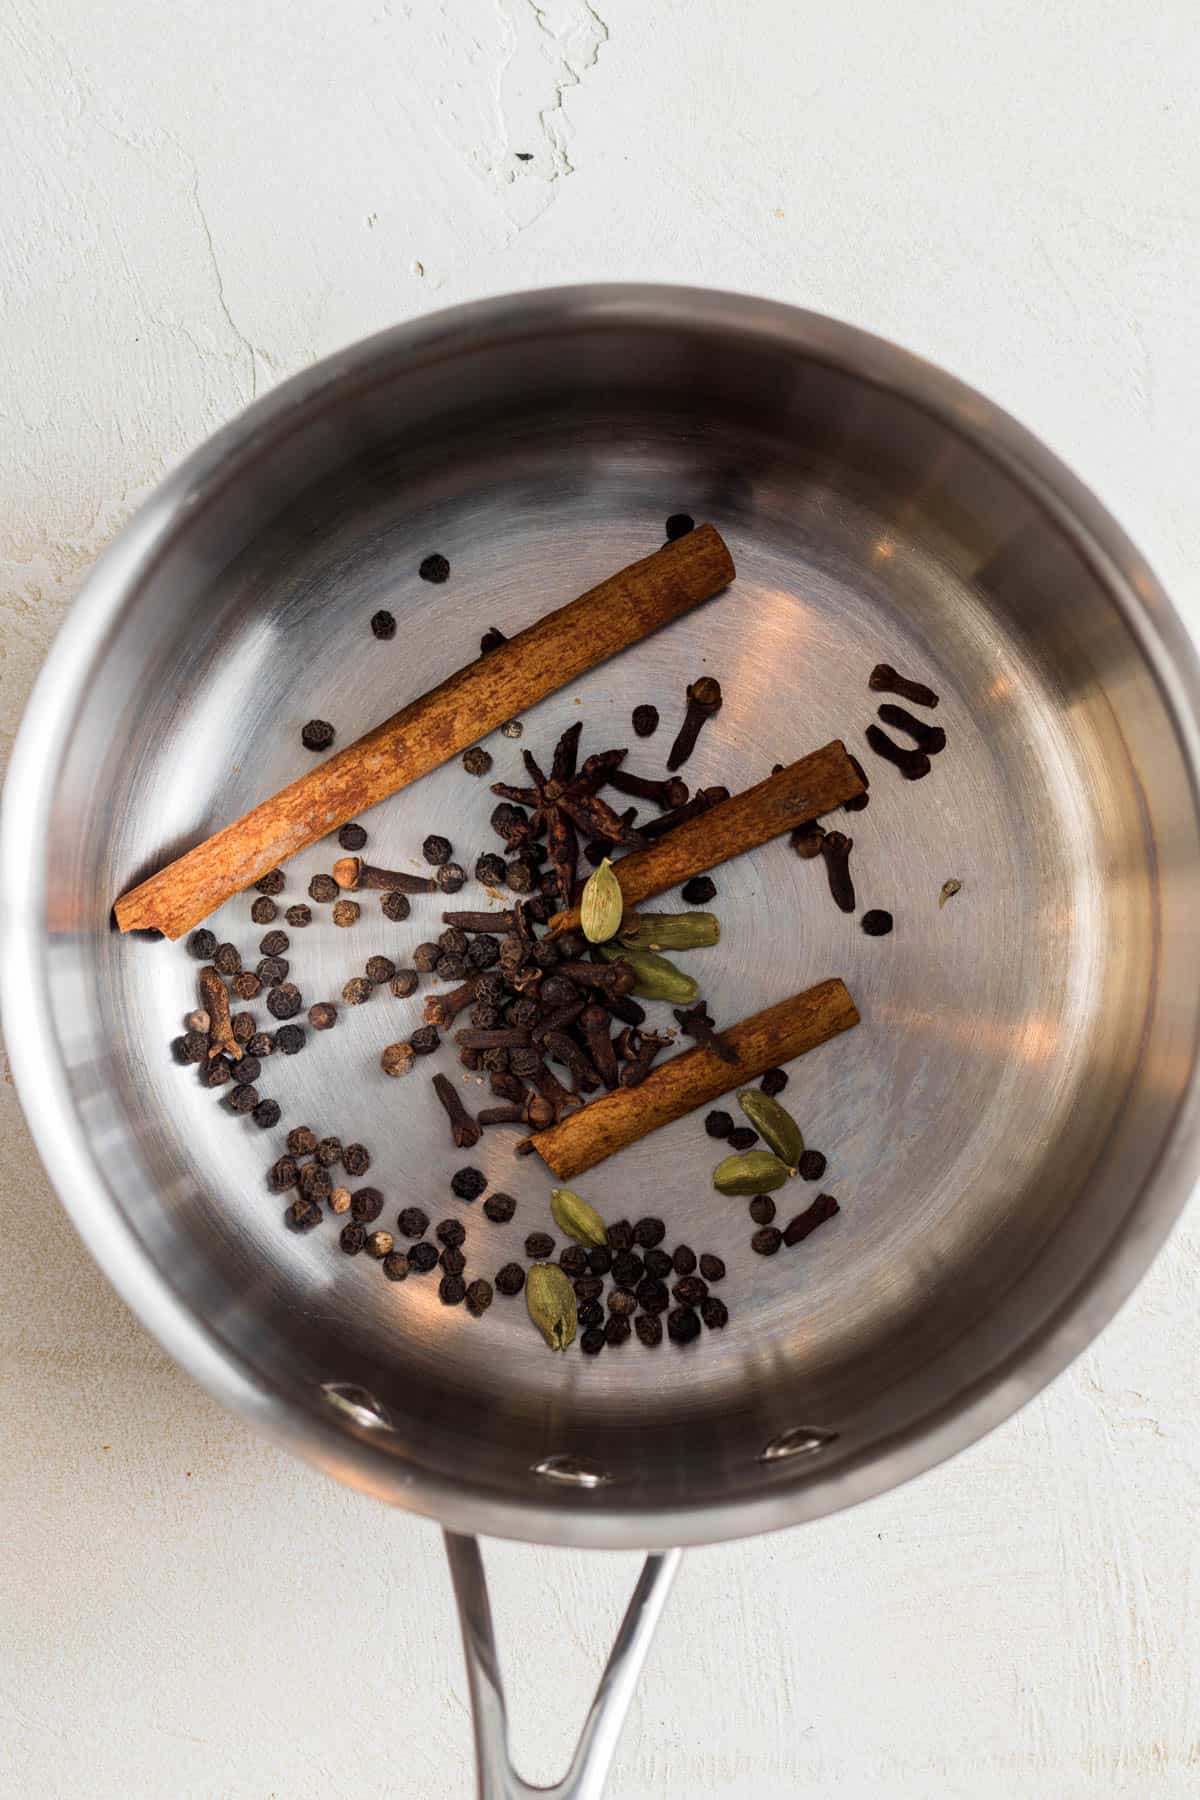 Spices toasting in a sauce pan.